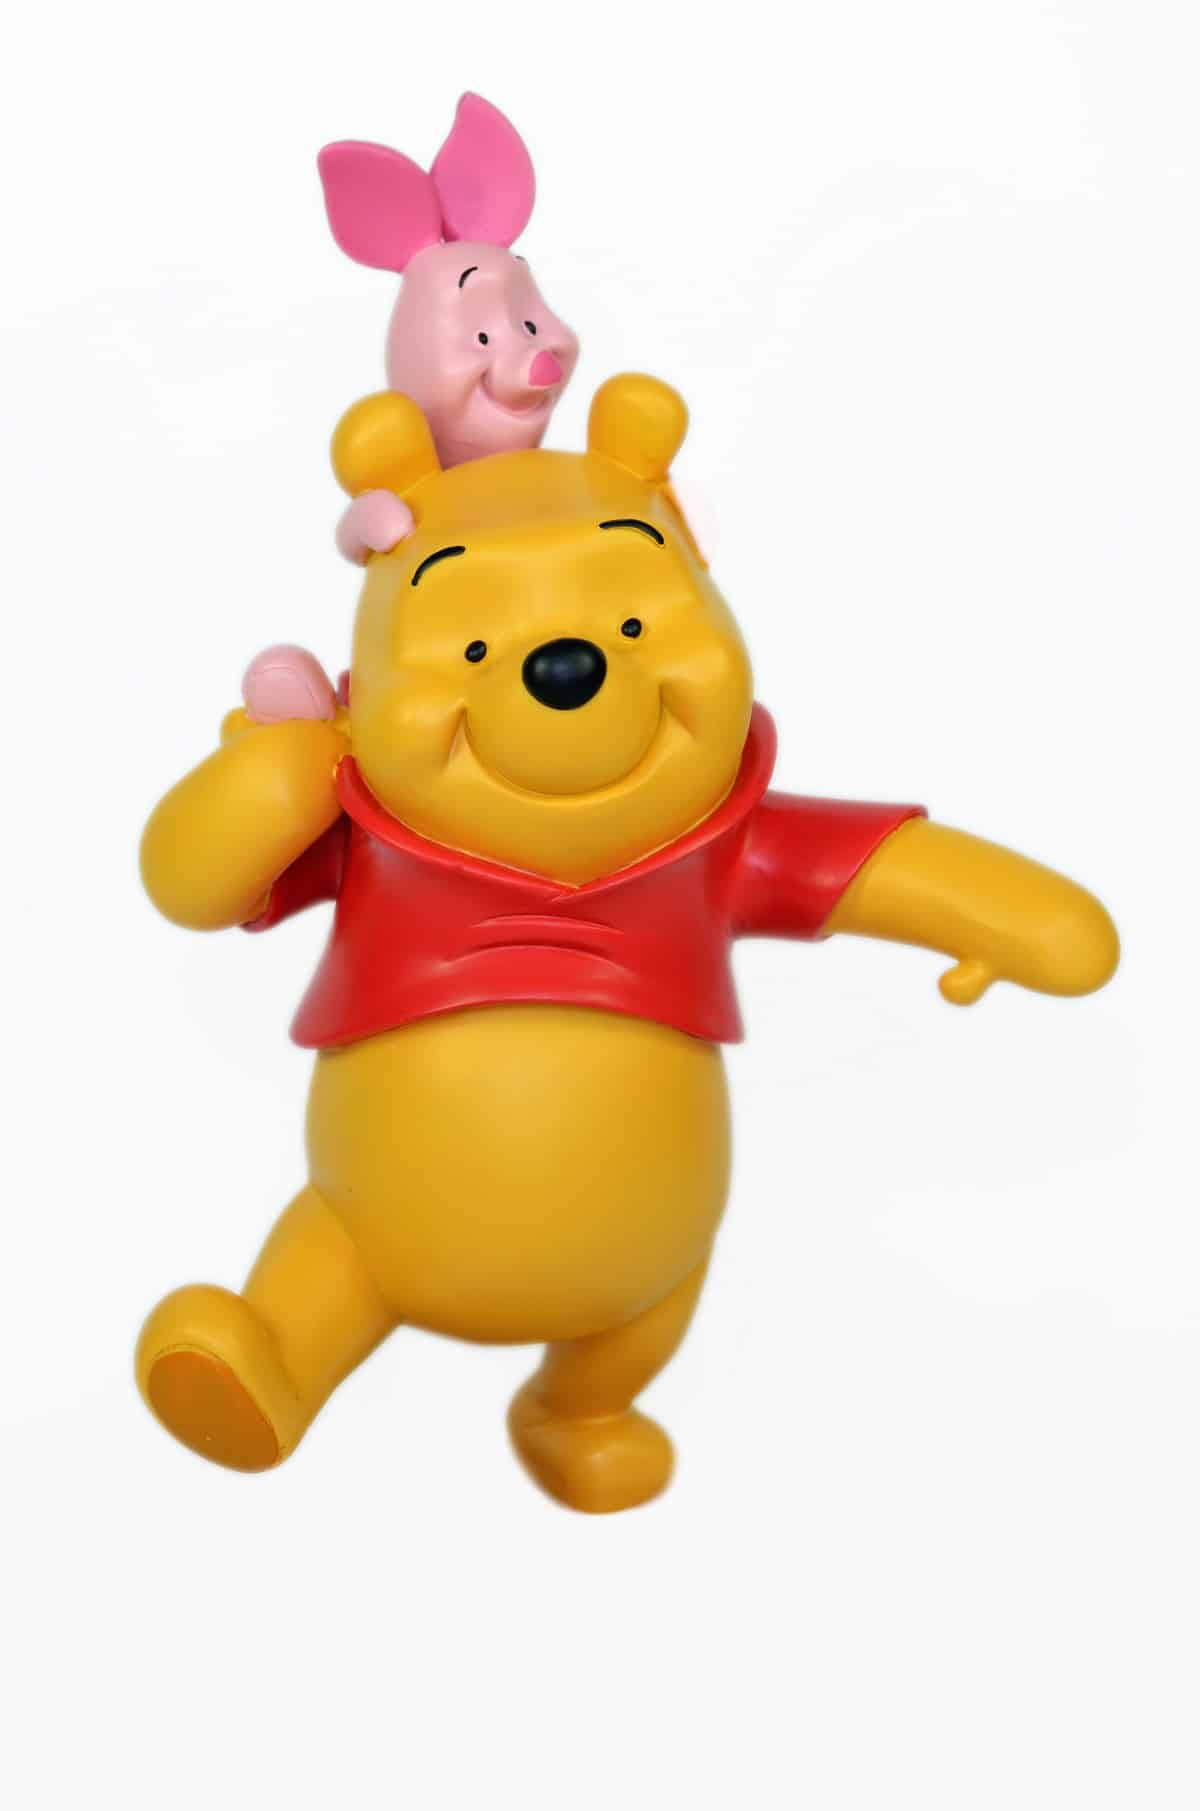 Studio image of Winnie the Pooh and Piglet